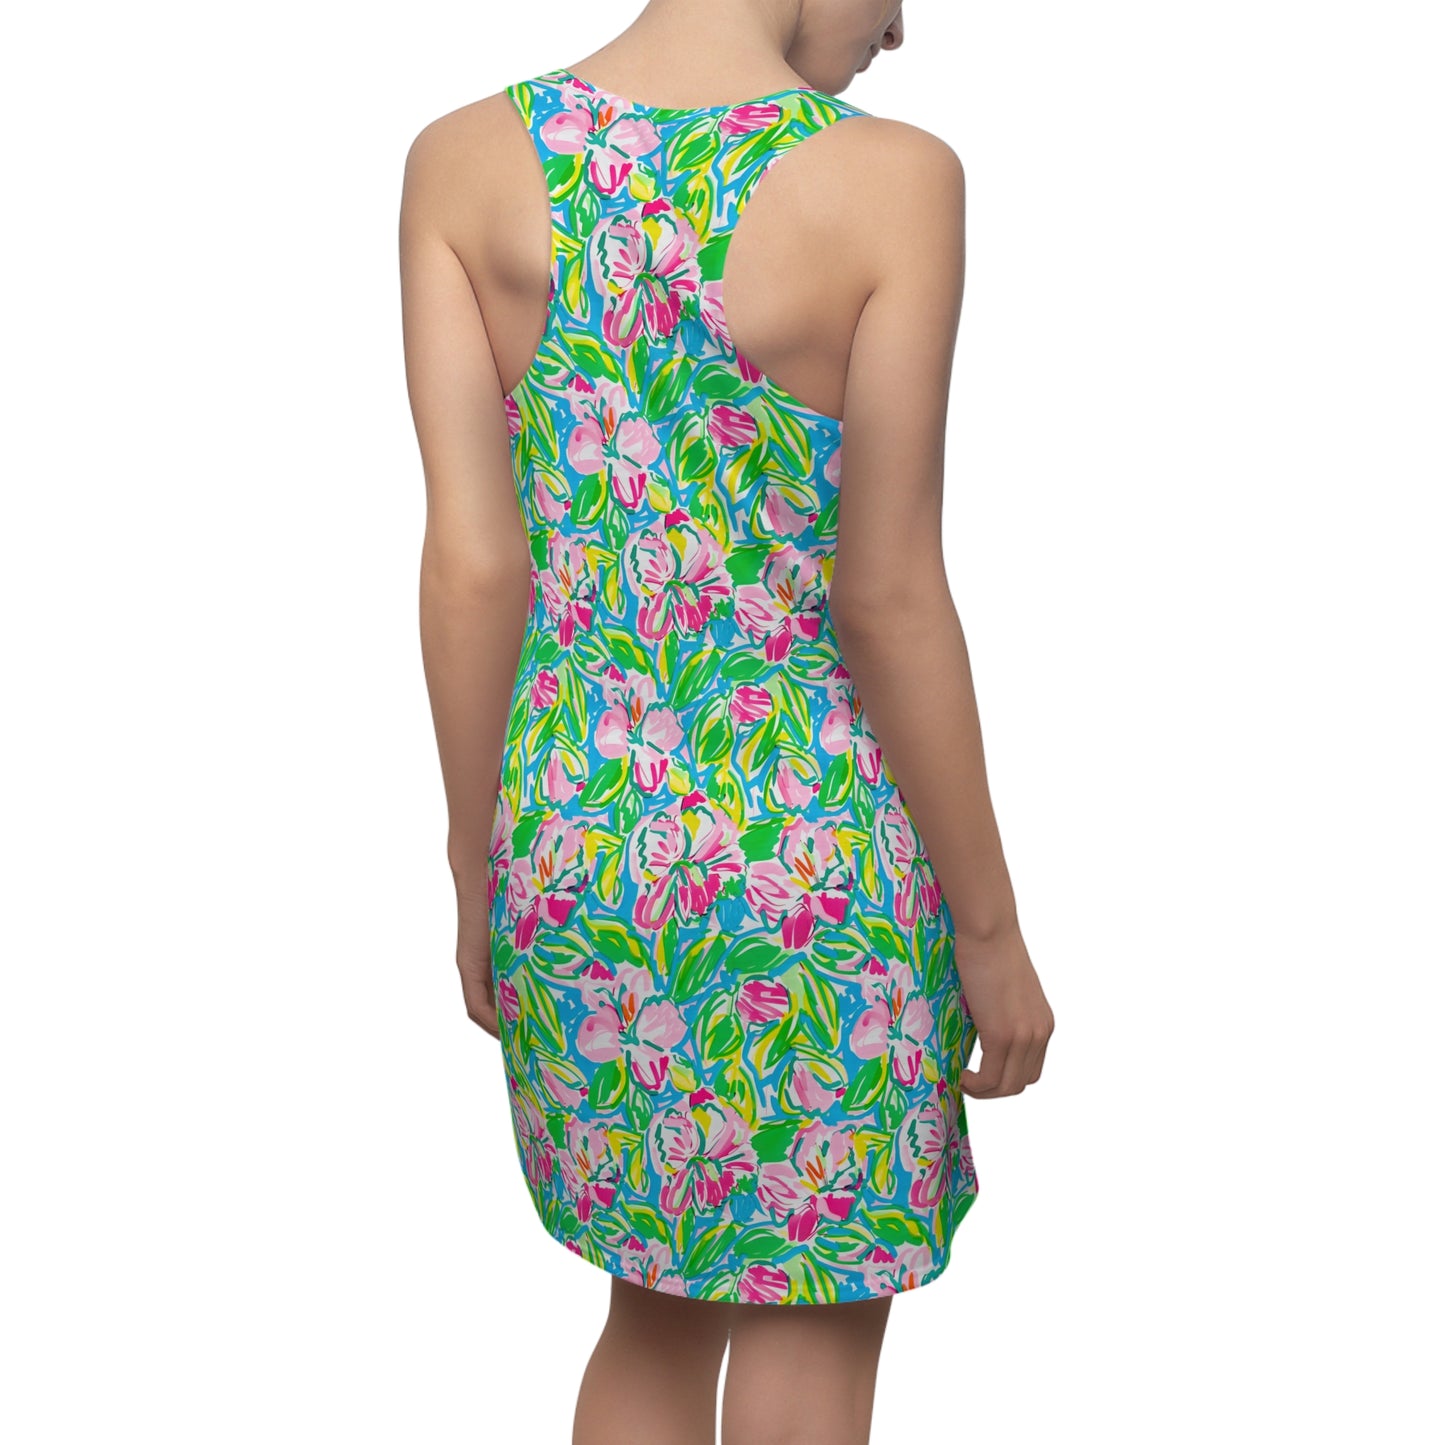 Whispering Meadows: Pink Blossoms, Lush Green Leaves, and Accents of Yellow and Blue Women's Racerback Dress XS - 2XL